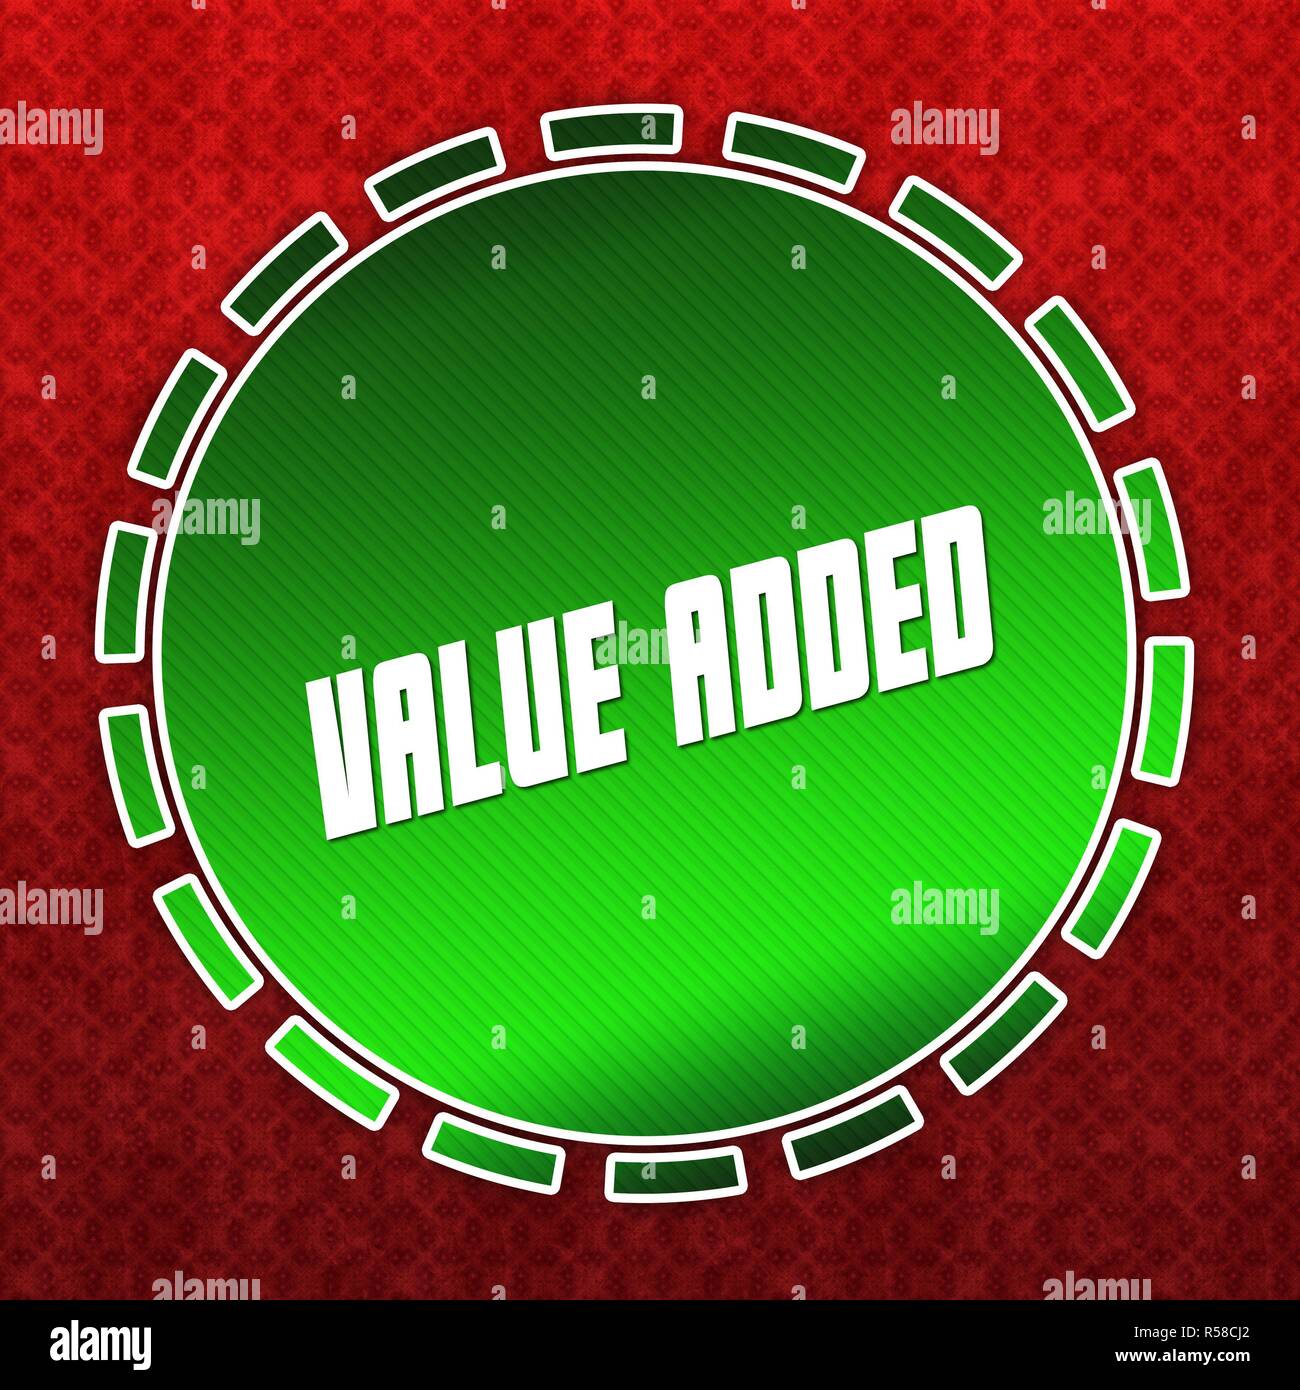 Green VALUE ADDED badge on red pattern background. Stock Photo